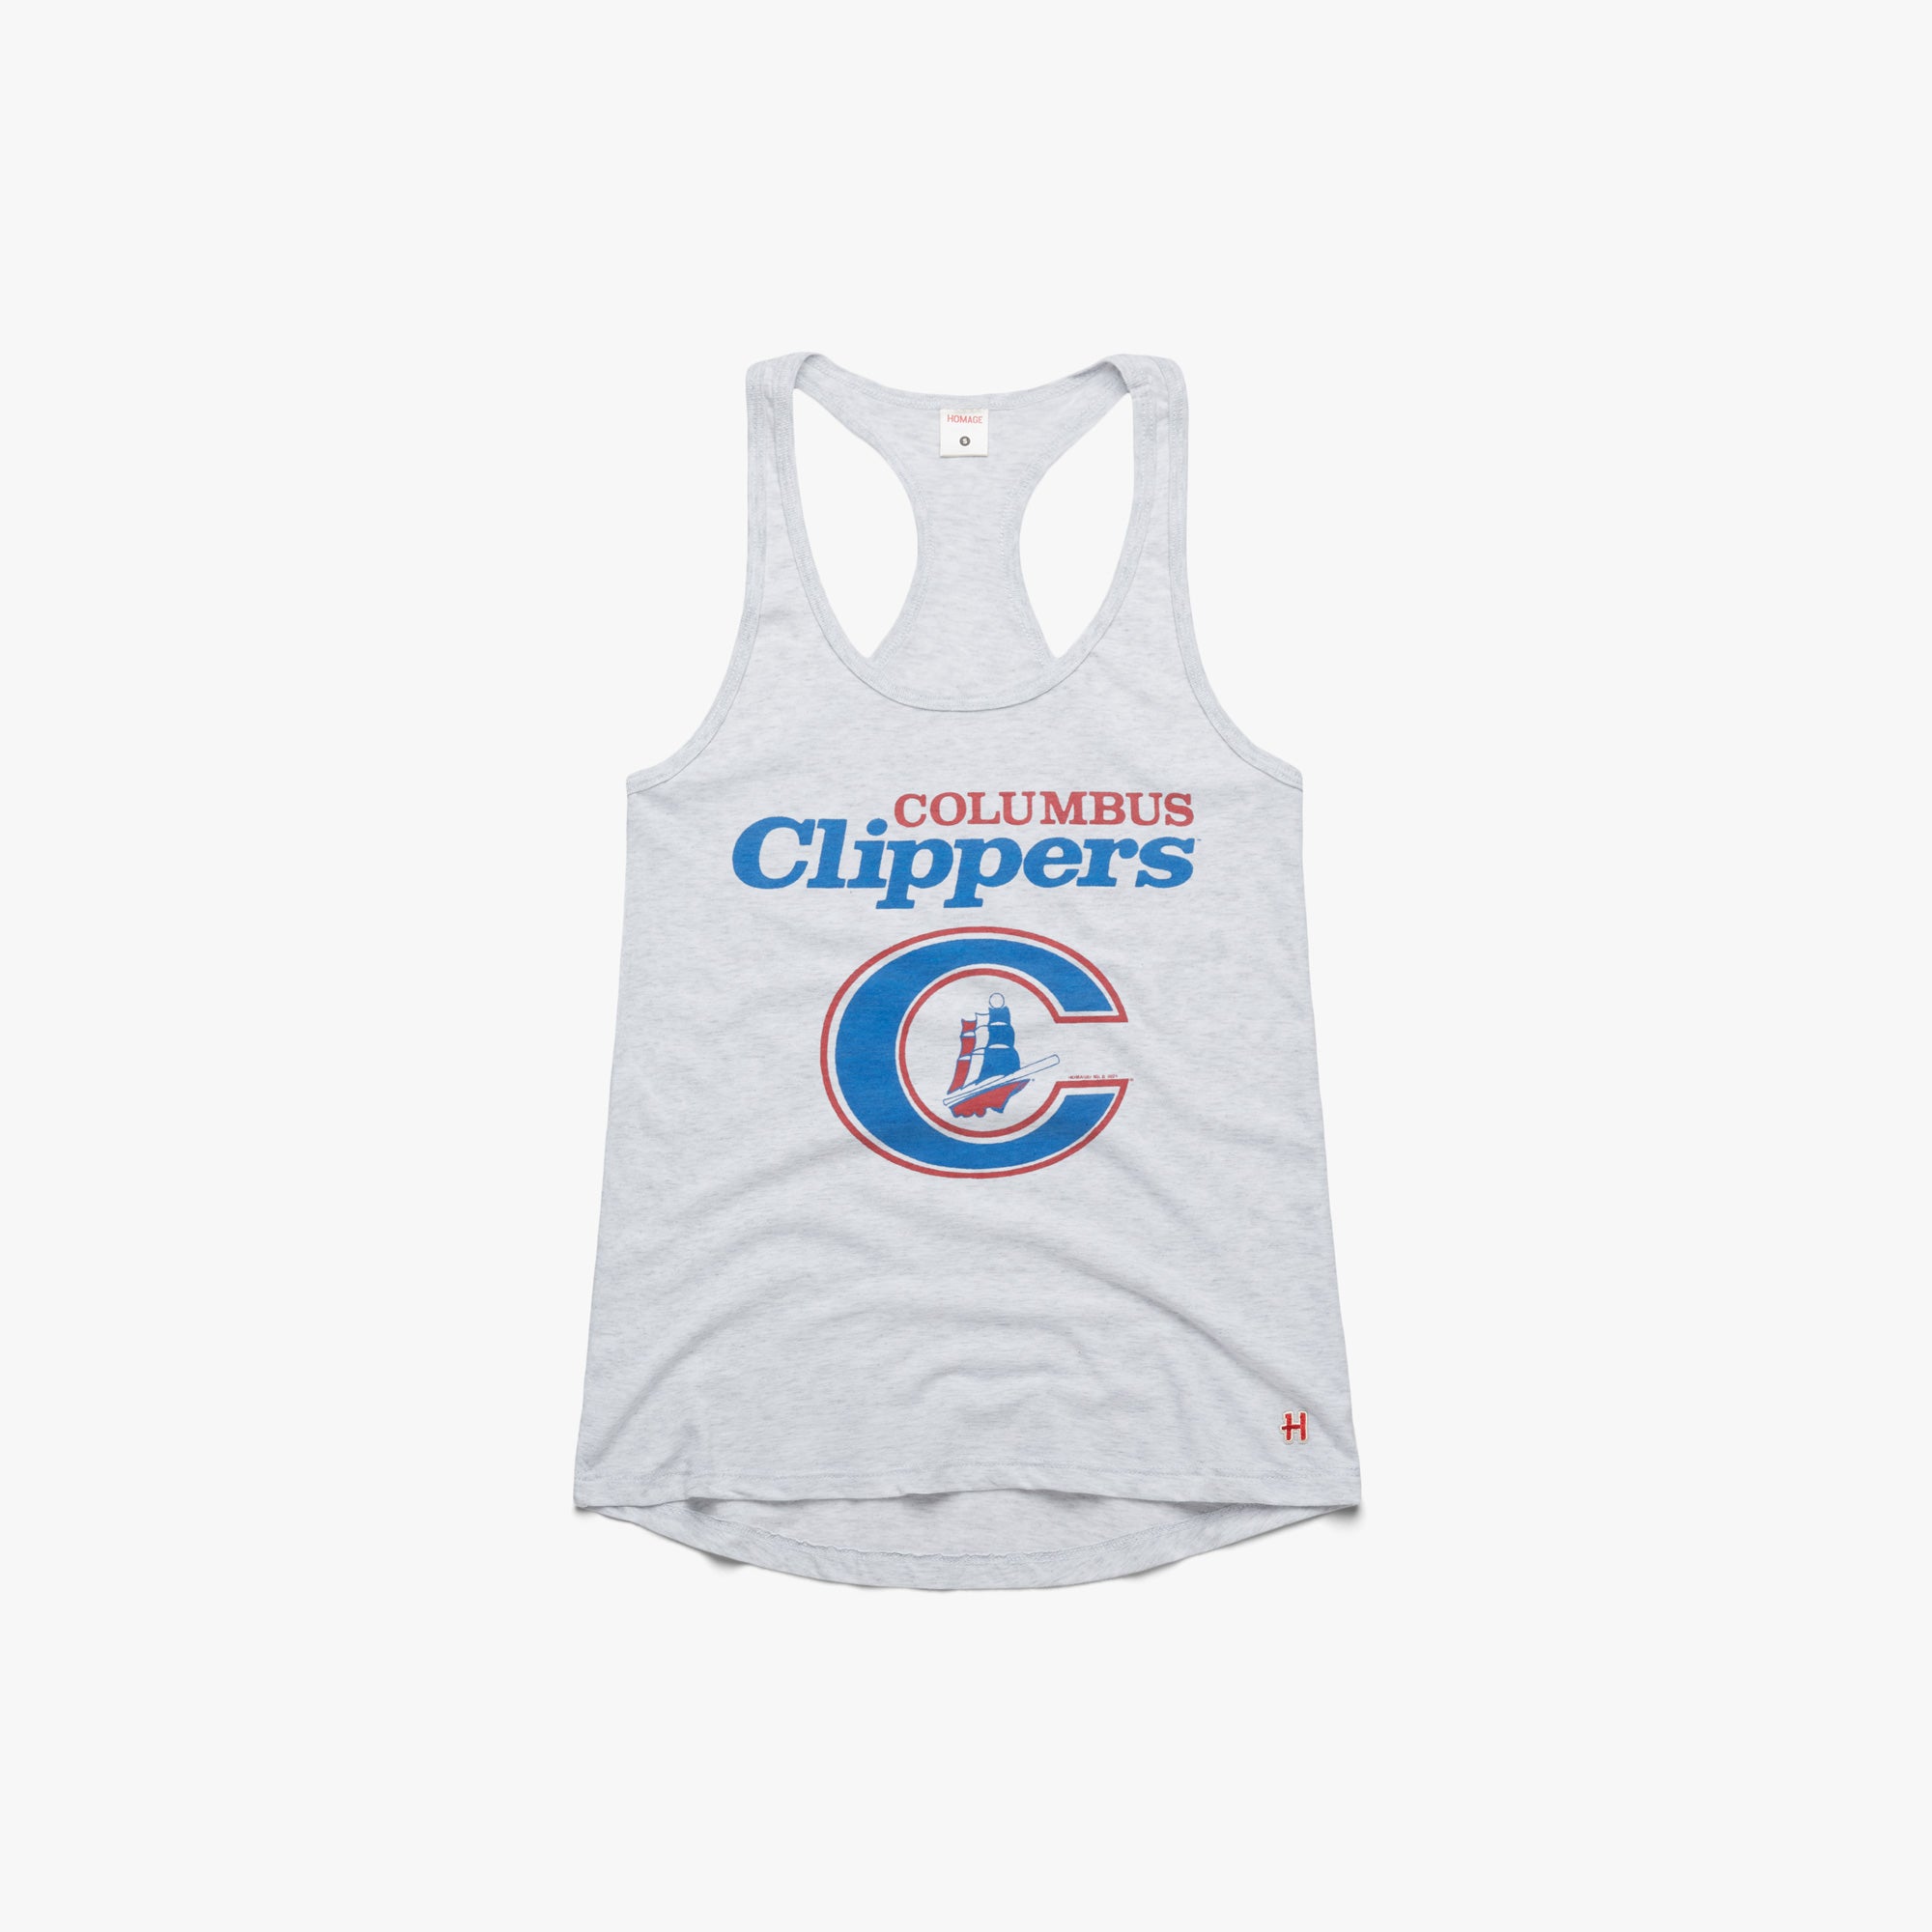 Women's Classic Clippers Racerback